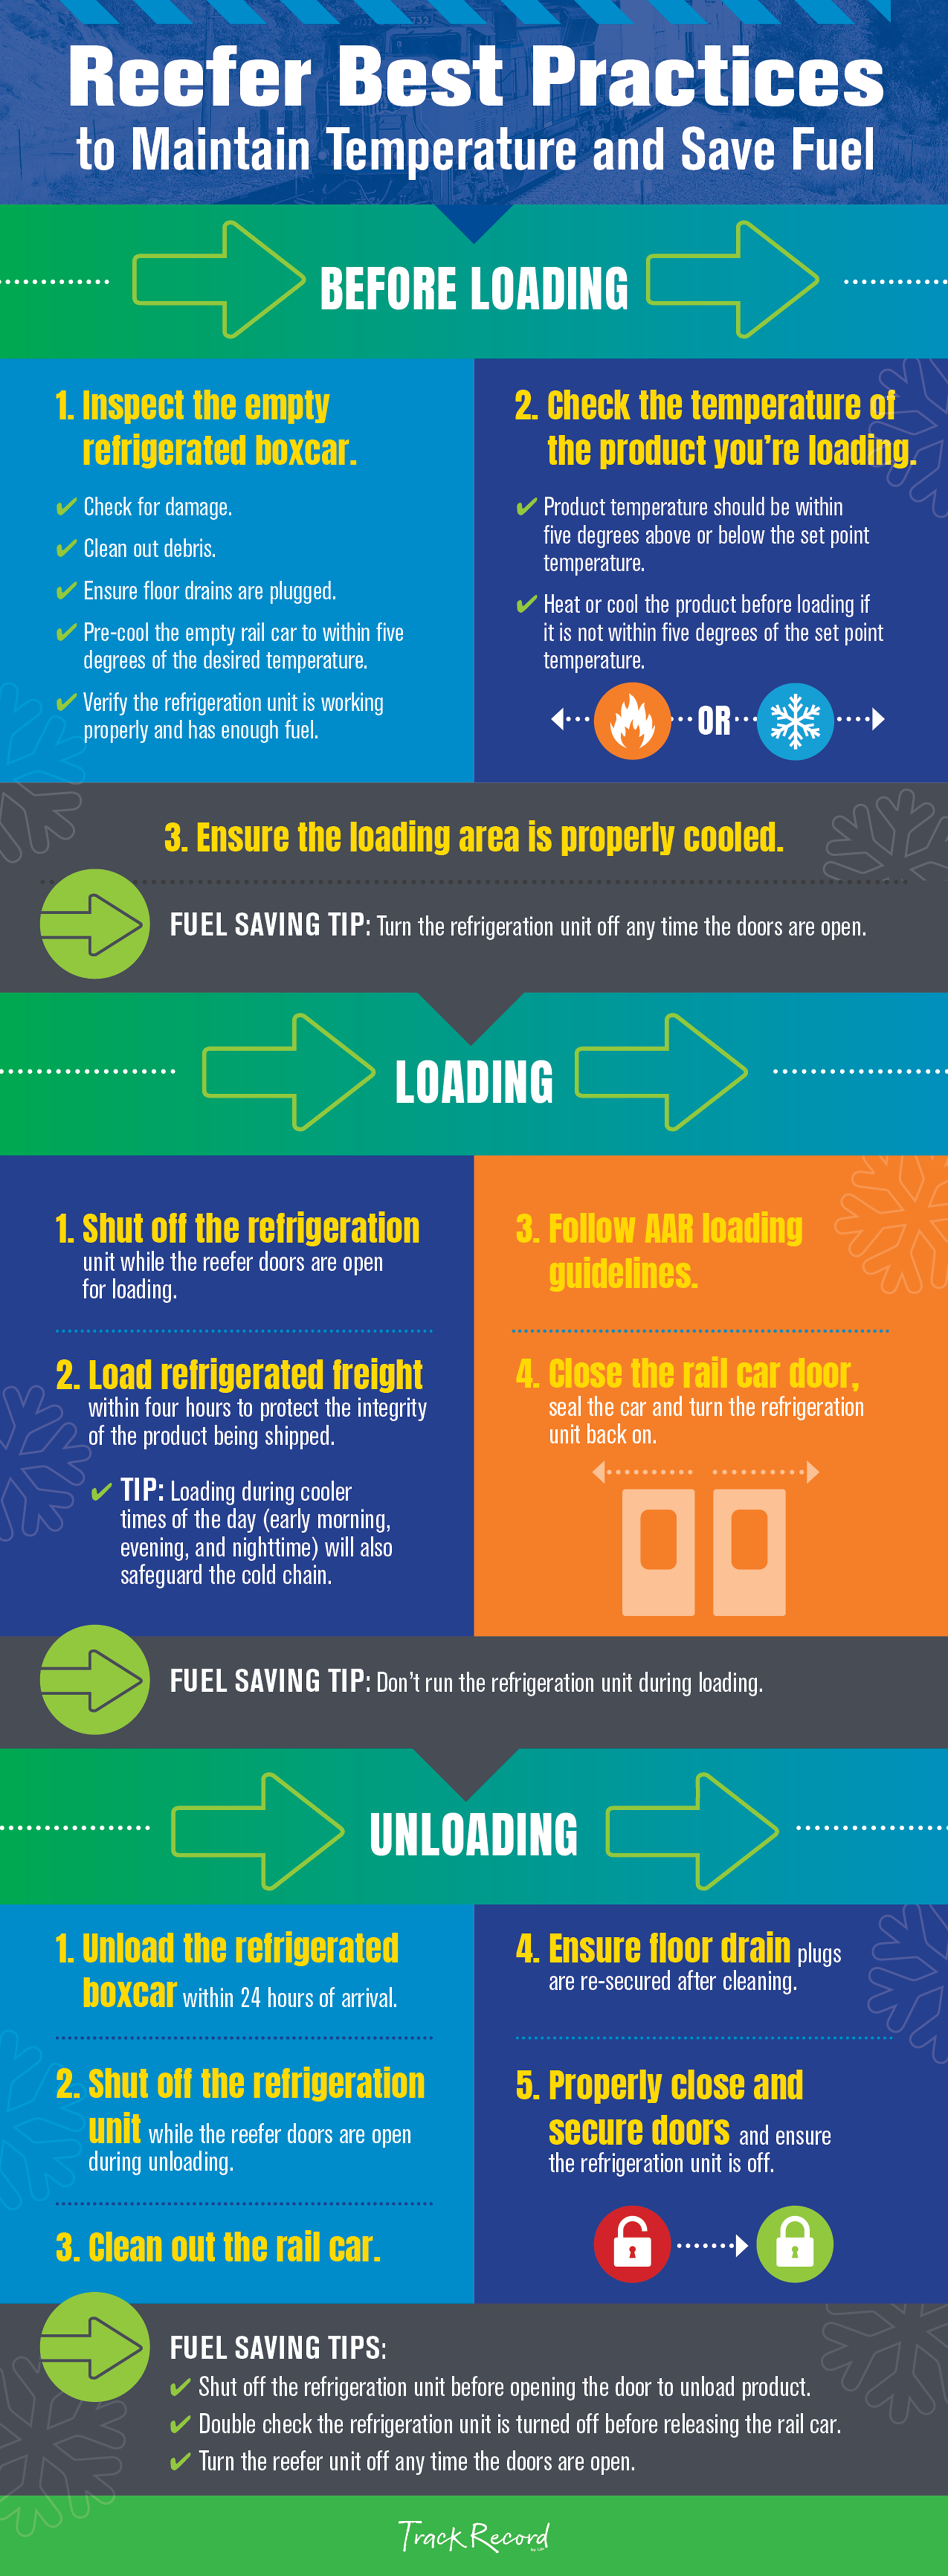 Reefer Best Practices INFOGRAPHIC 080222